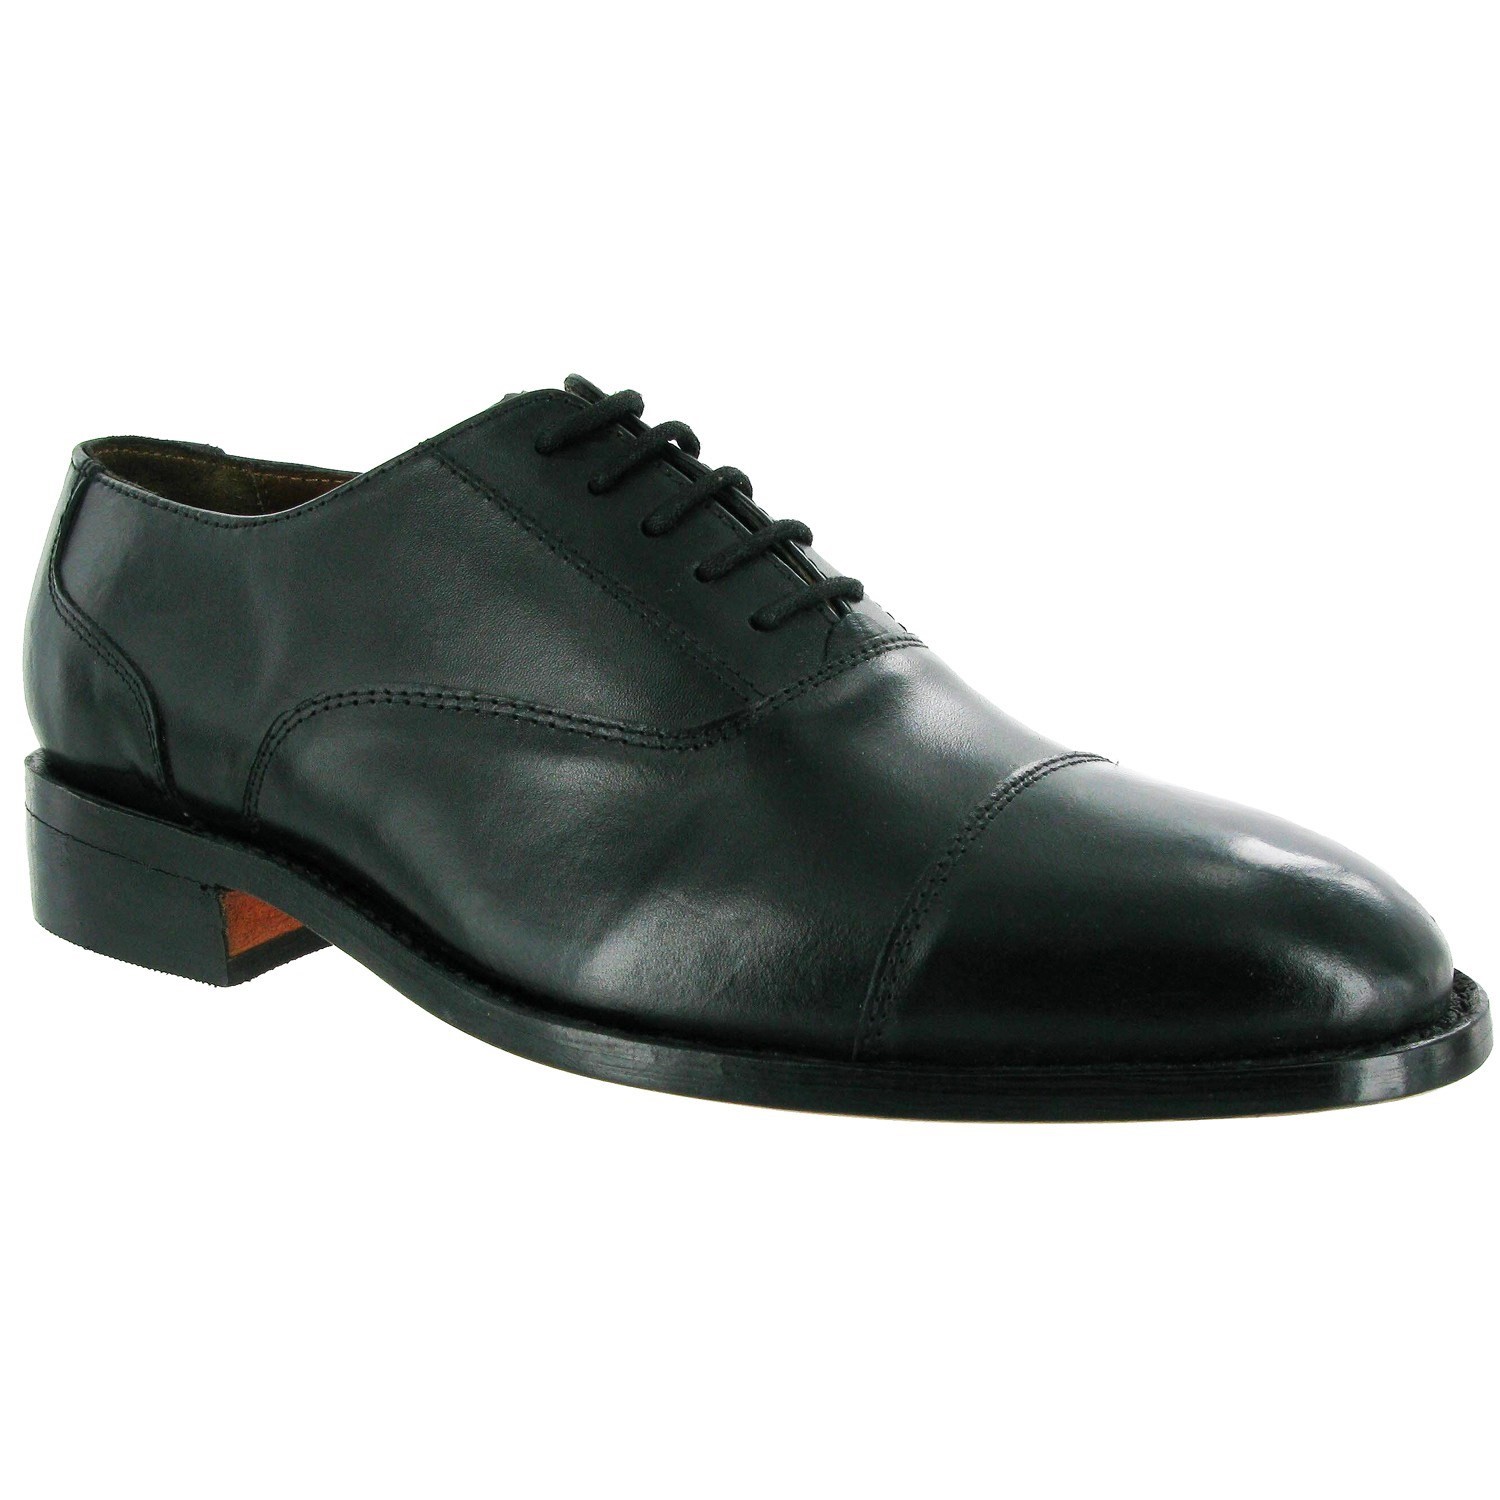 James Leather Soled Oxford Dress Shoe